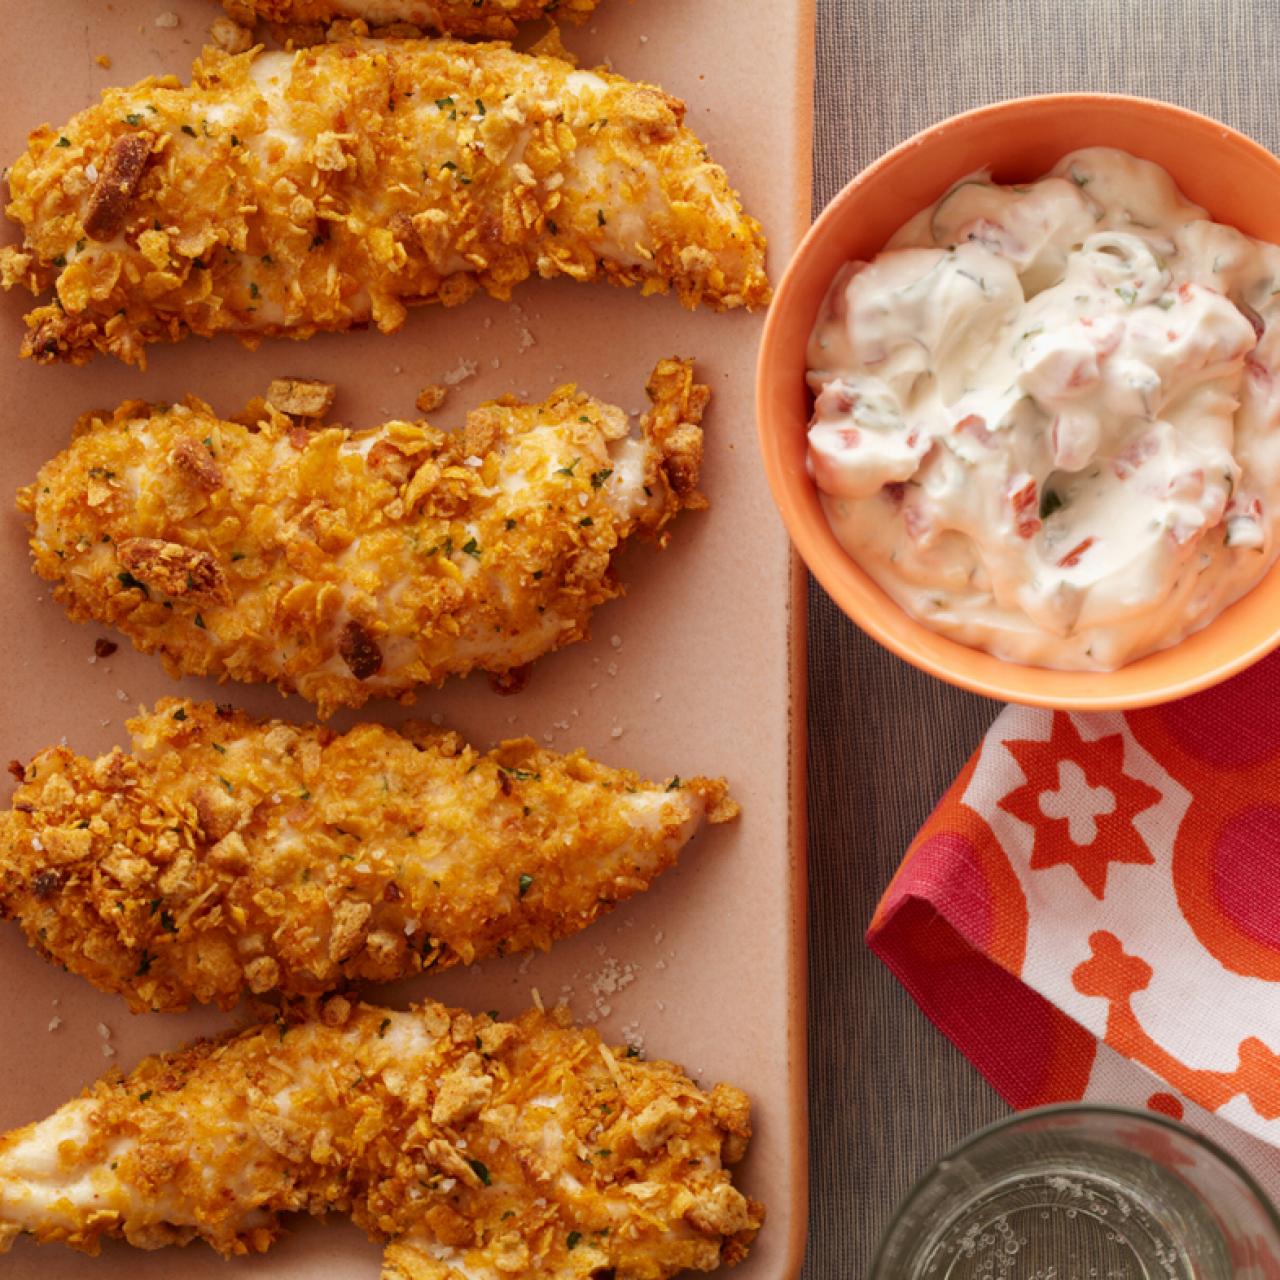 White Meat Chicken: A Lighter Fare for Delightful Dinners